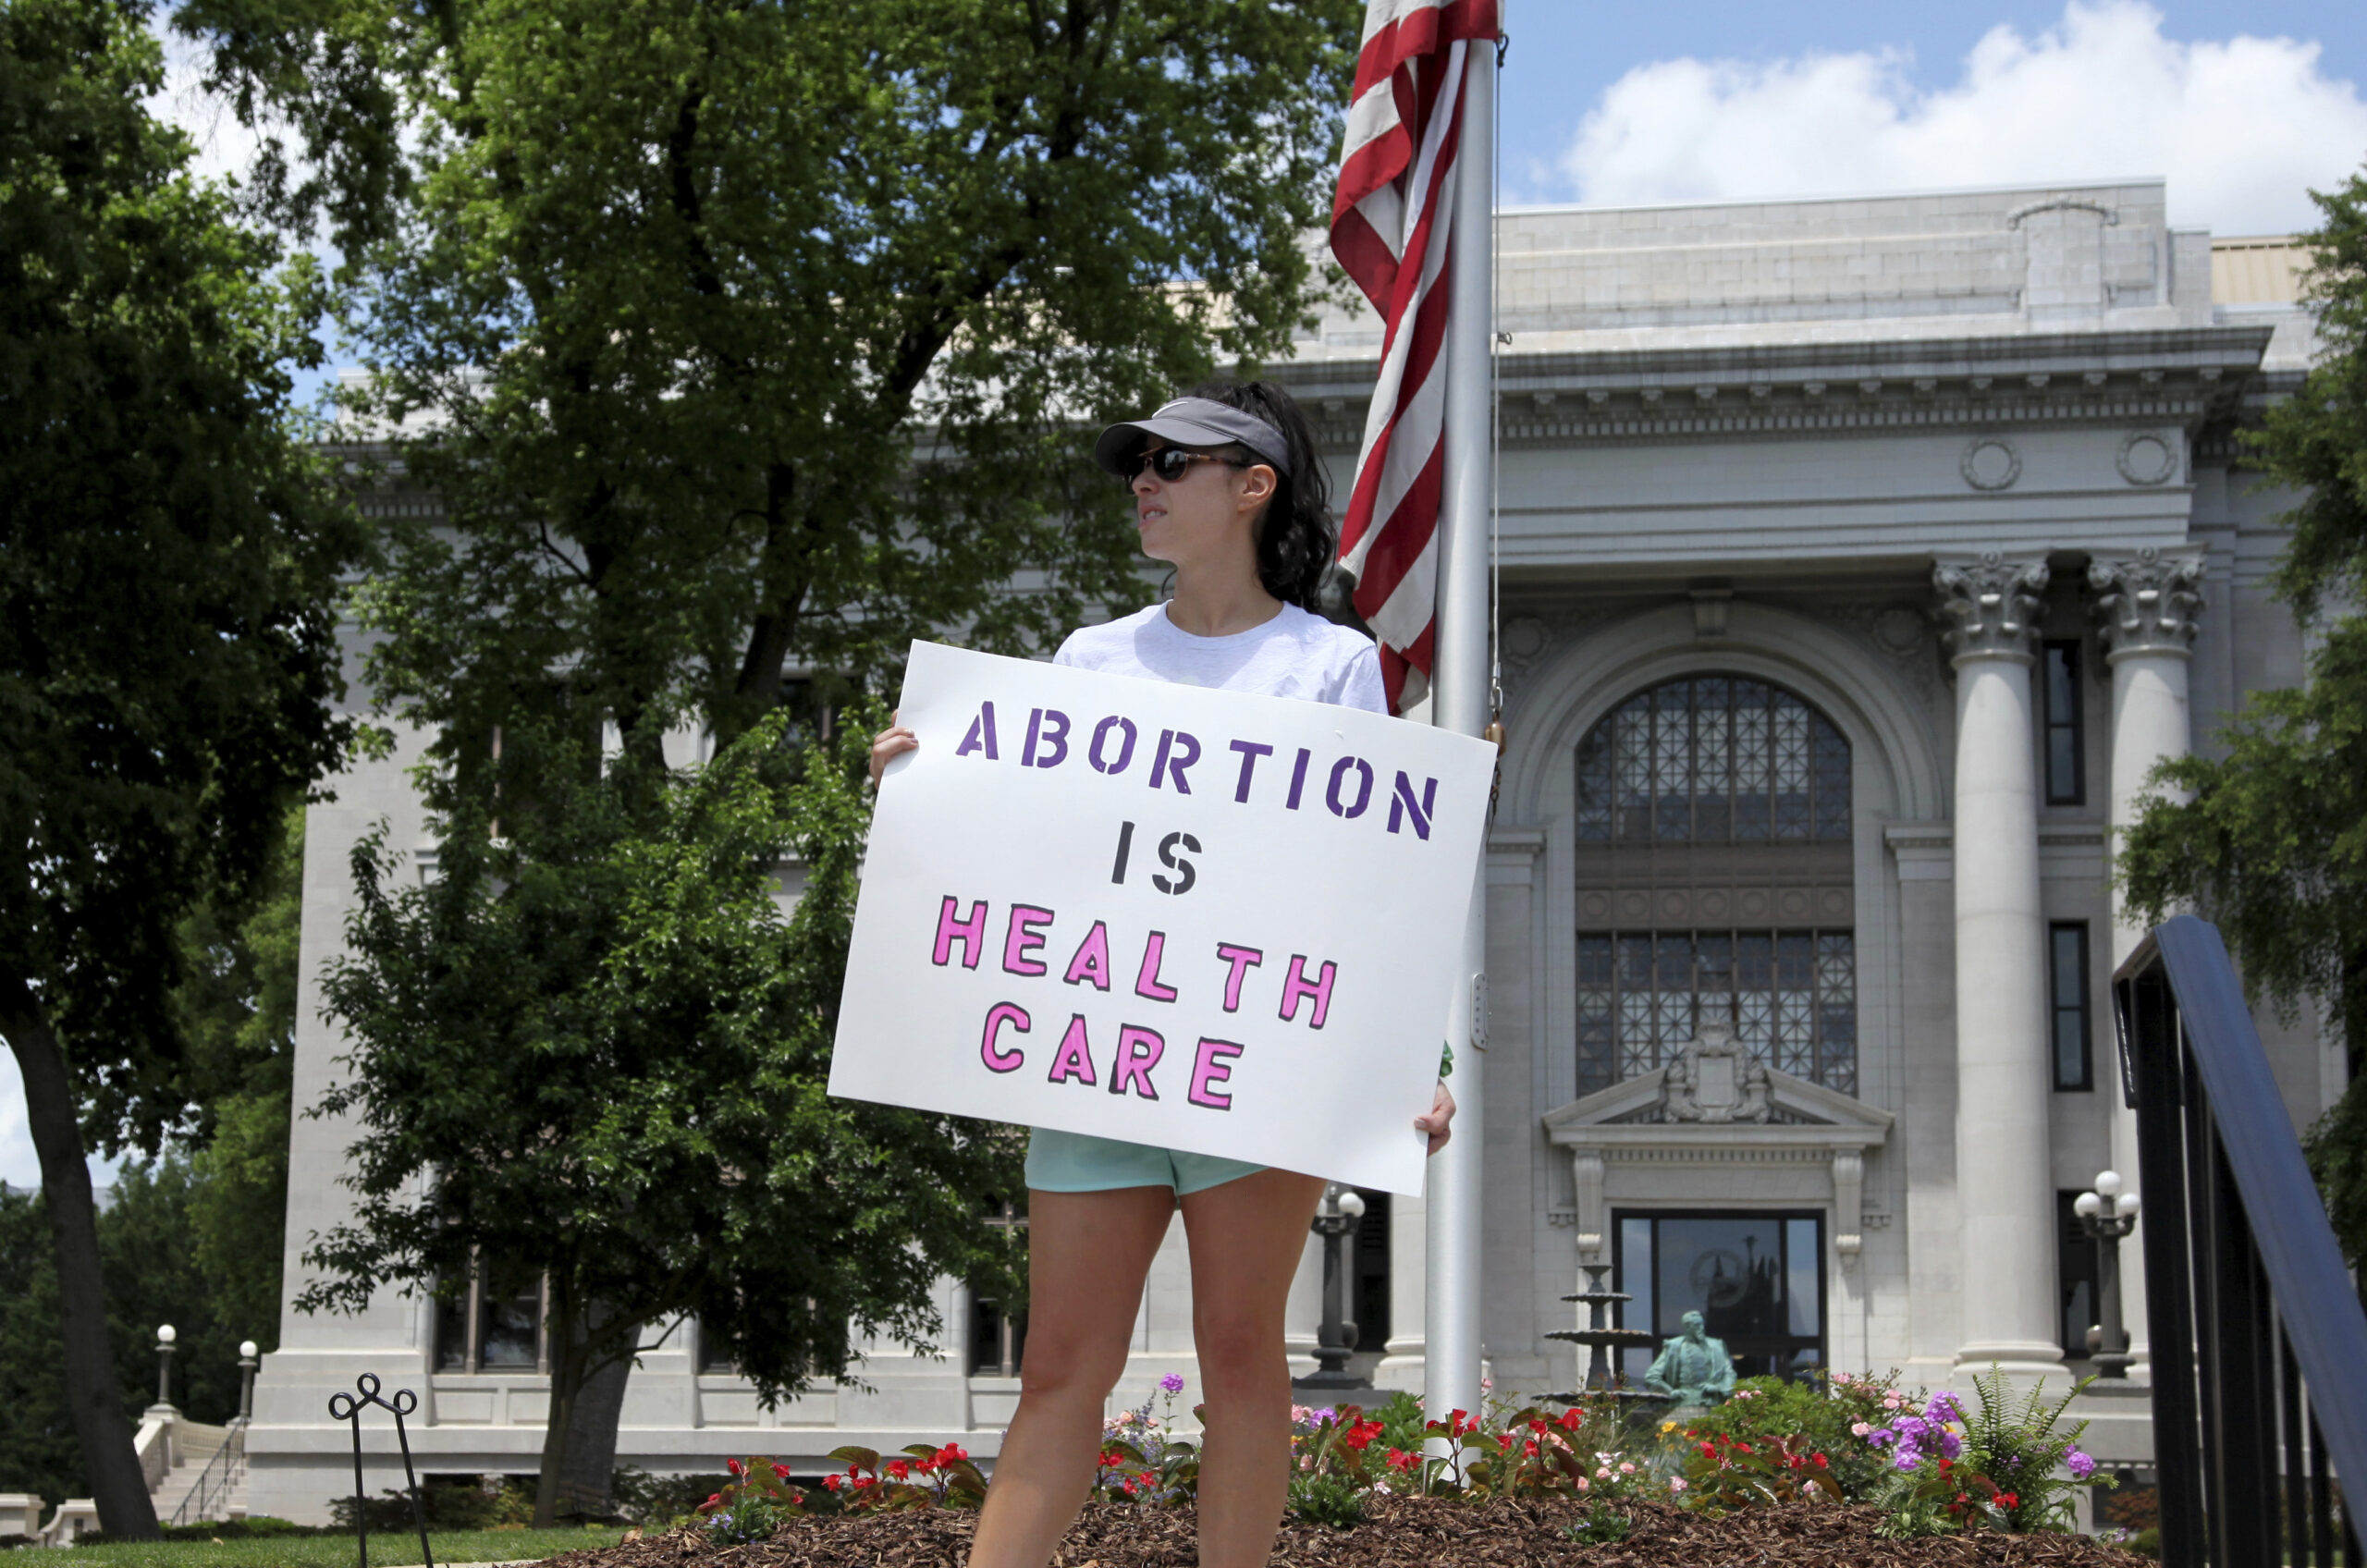 FILE - Abortion-rights demonstrator Jessica Smith holds a sign in front of the Hamilton County Court House on May 14, 2022, in Chattanooga, Tenn. A federal court on Tuesday, June 28, 2022, allowed Tennessee's ban on abortion as early as six weeks into pregnancy to take effect, citing the Supreme Court's decision last week to overturn the landmark Roe v. Wade abortion rights case. (AP Photo/Ben Margot, File)